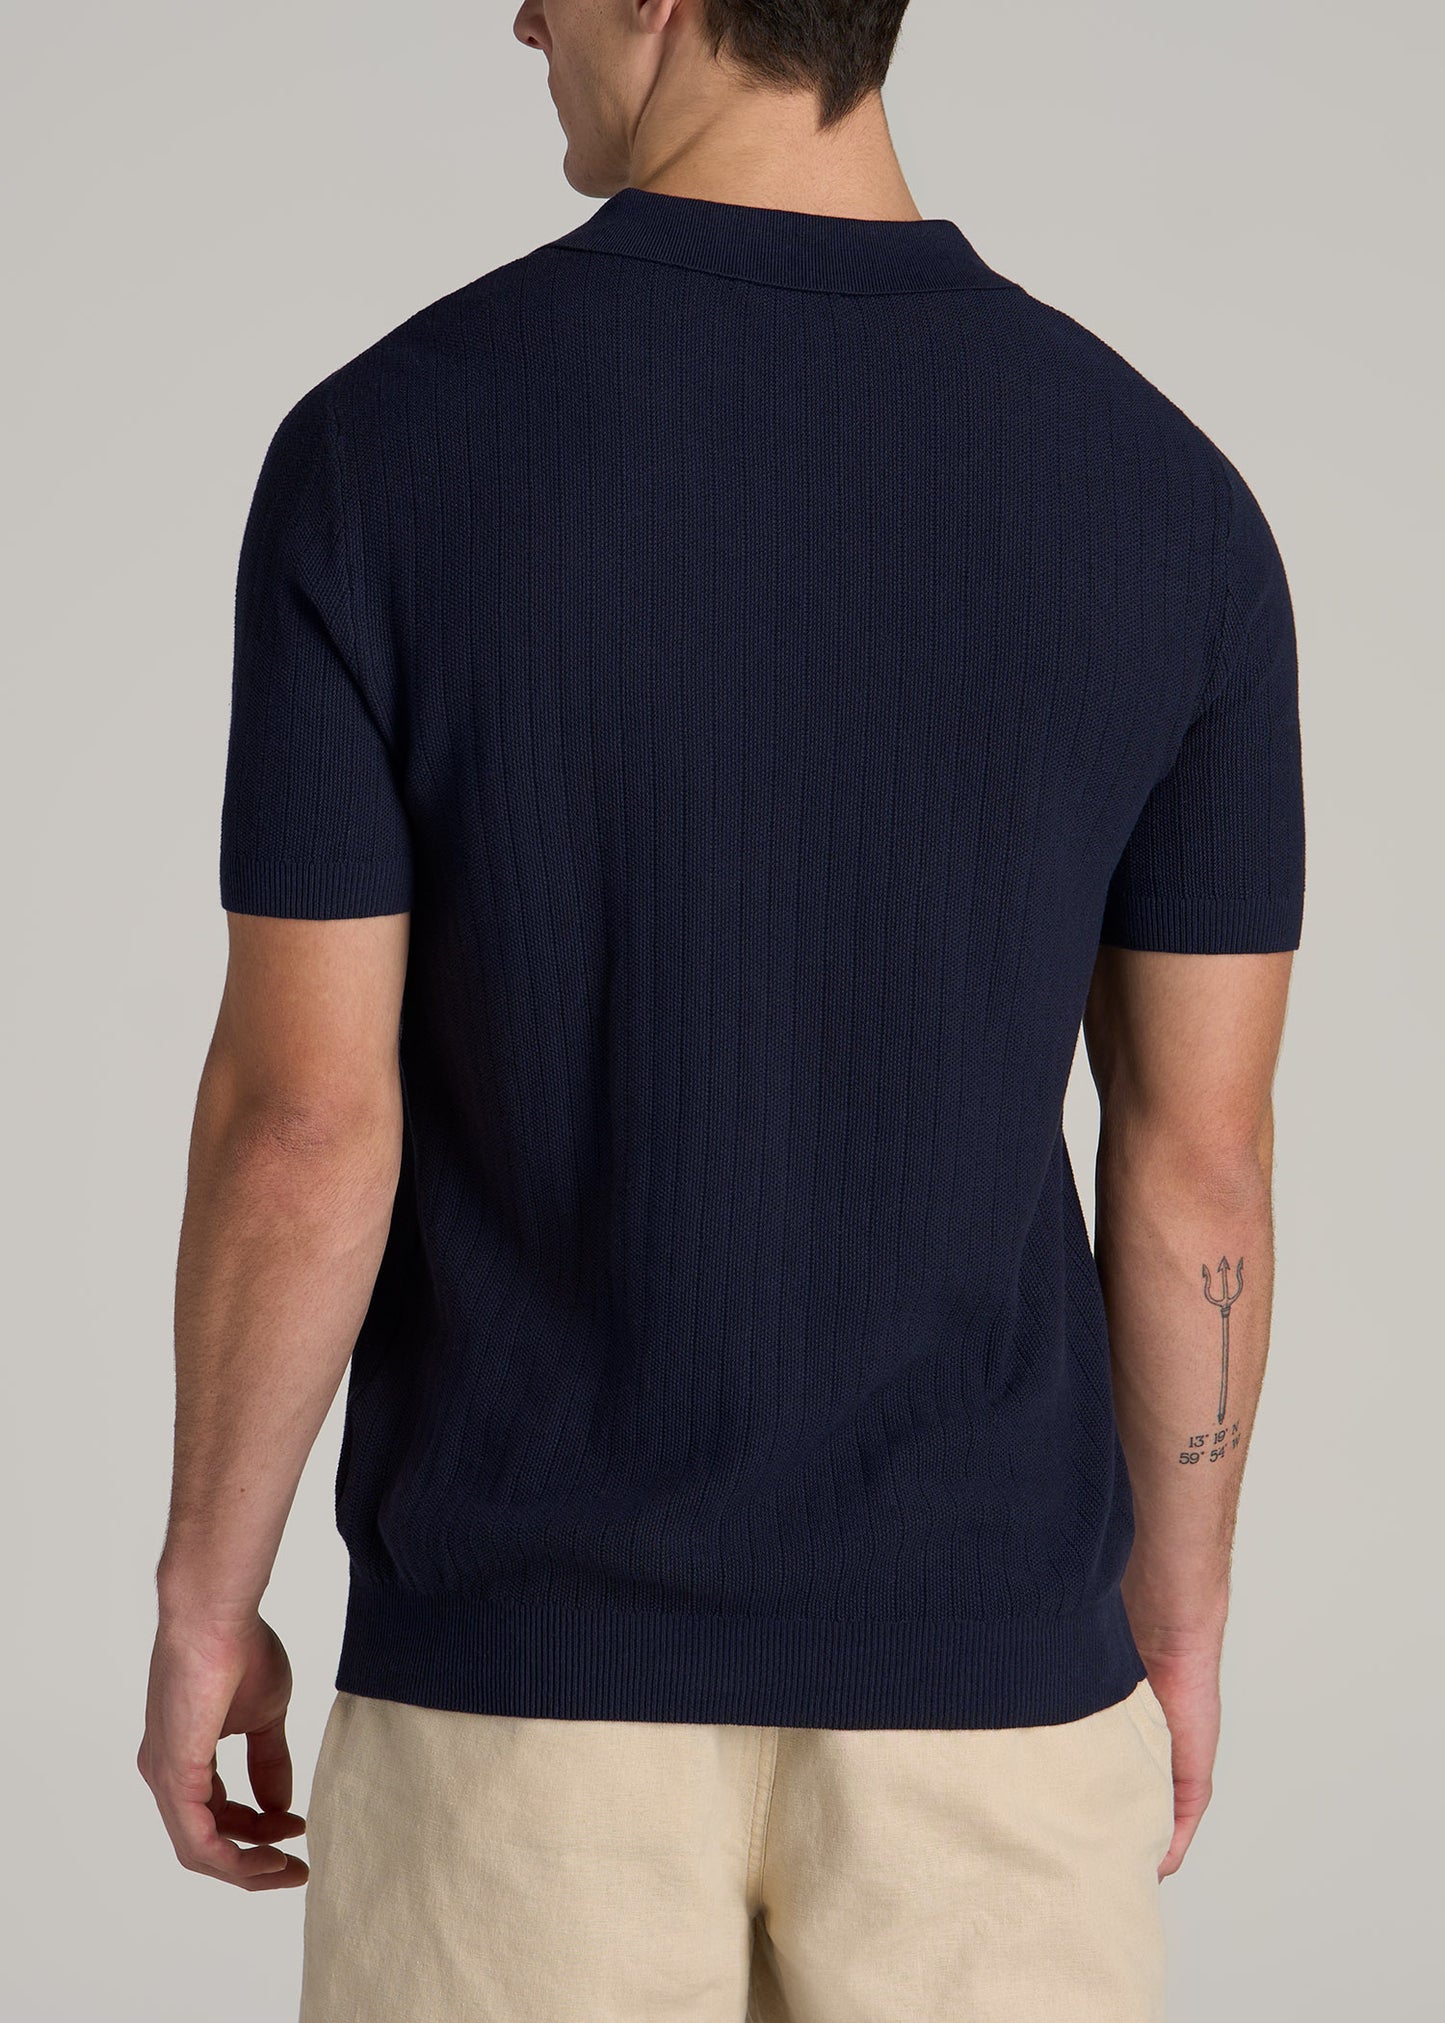 Linen Blend Ribbed Knit Polo Shirt for Tall Men in Evening Blue